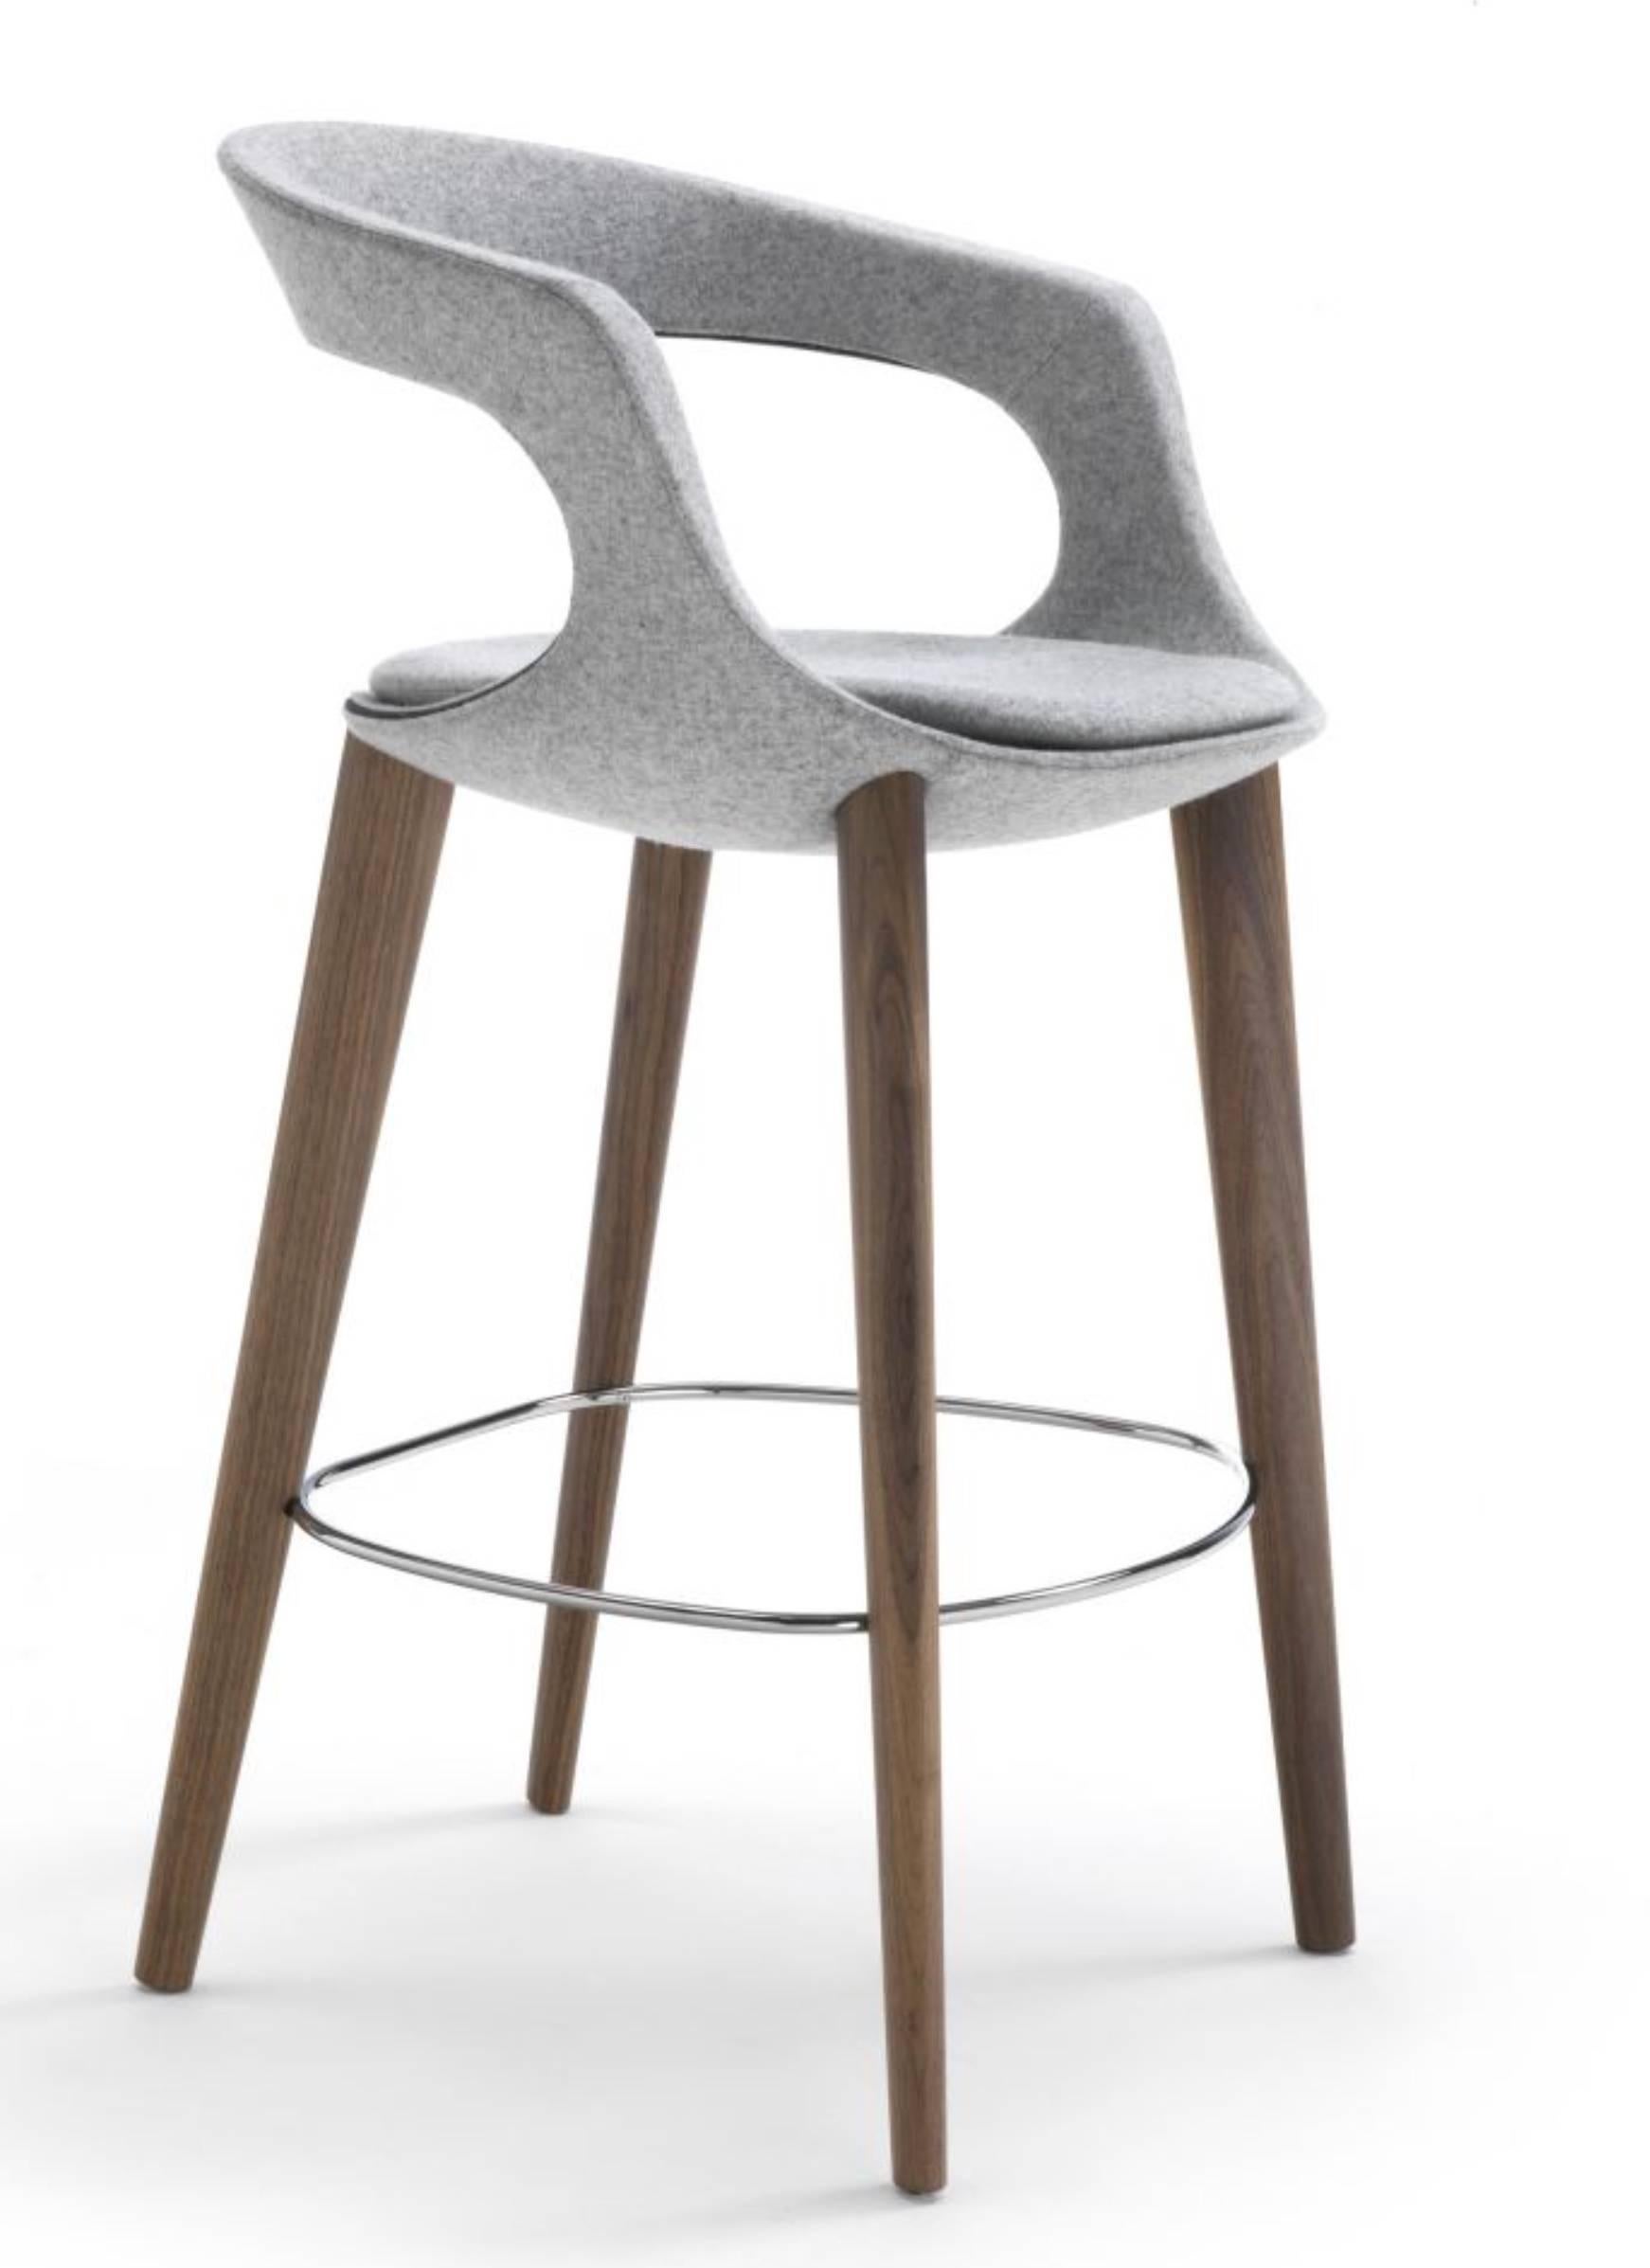 From our Italian Modern Furniture Collection: the latest designer bar stool from our selection of designer furniture custom made to order, available in many different finishes and shipped from Italy. 

You can pick this modern stool in the counter